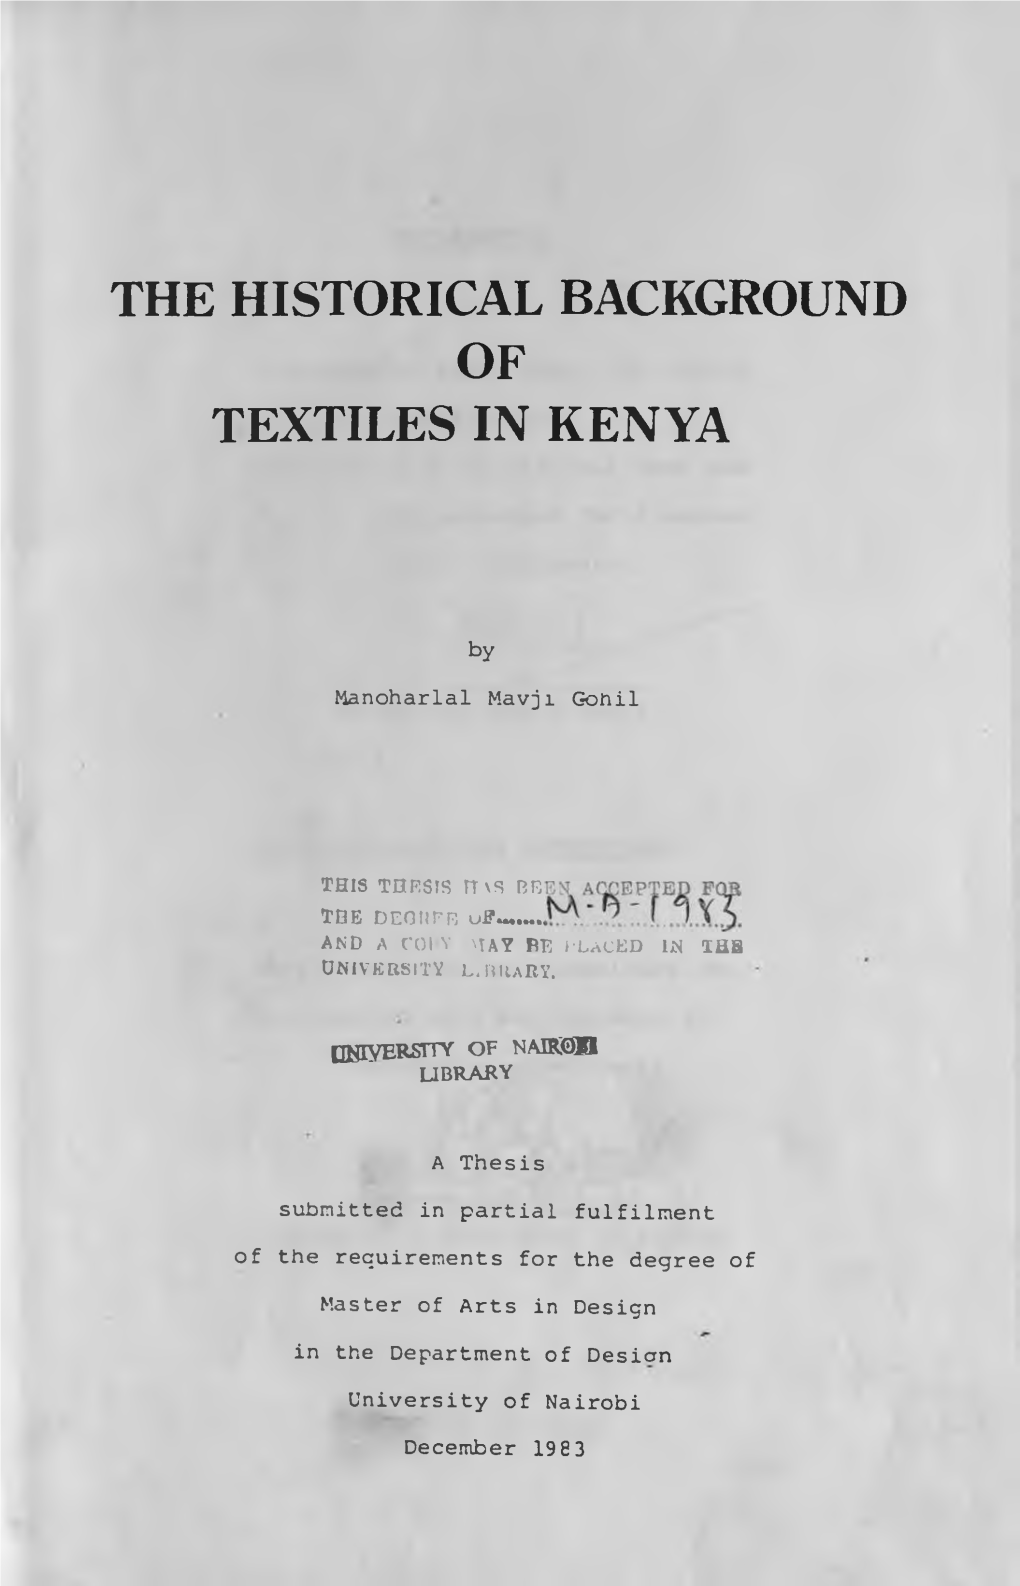 The Historical Background of Textiles in Kenya